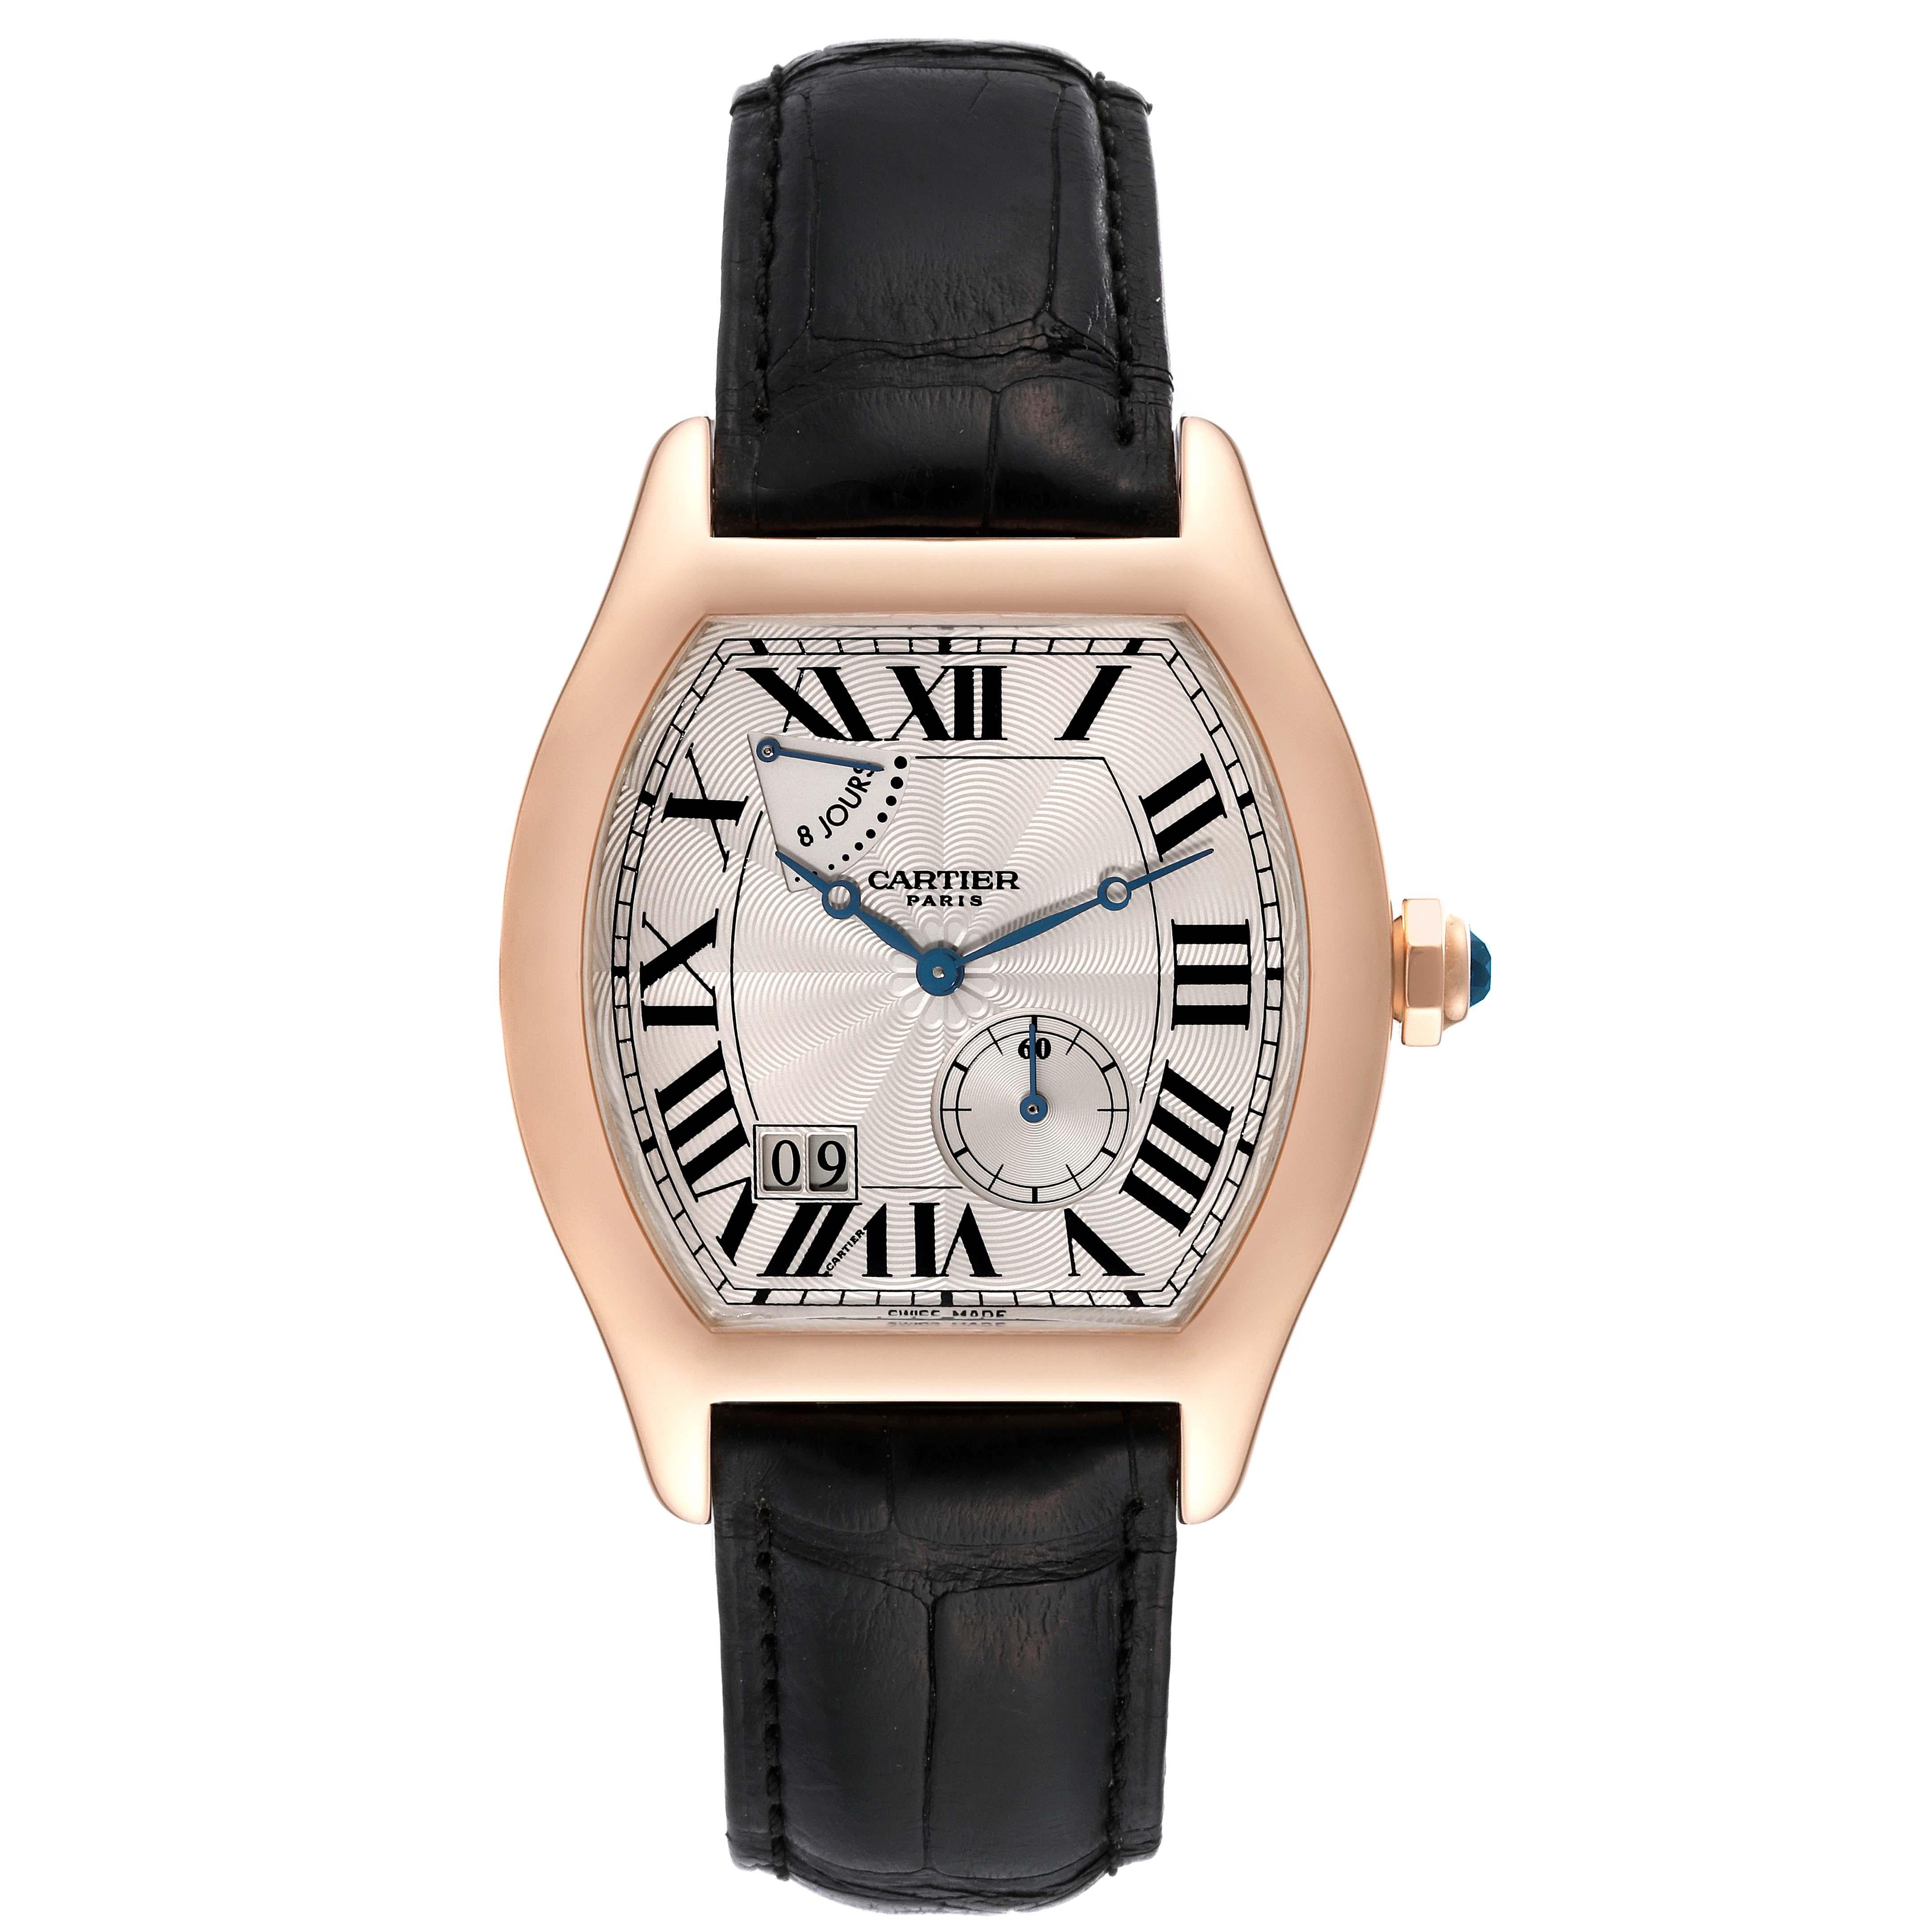 Cartier Tortue Privee Rose Gold 8 Day Power Reserve Mens Watch W1545851 In Excellent Condition For Sale In Atlanta, GA